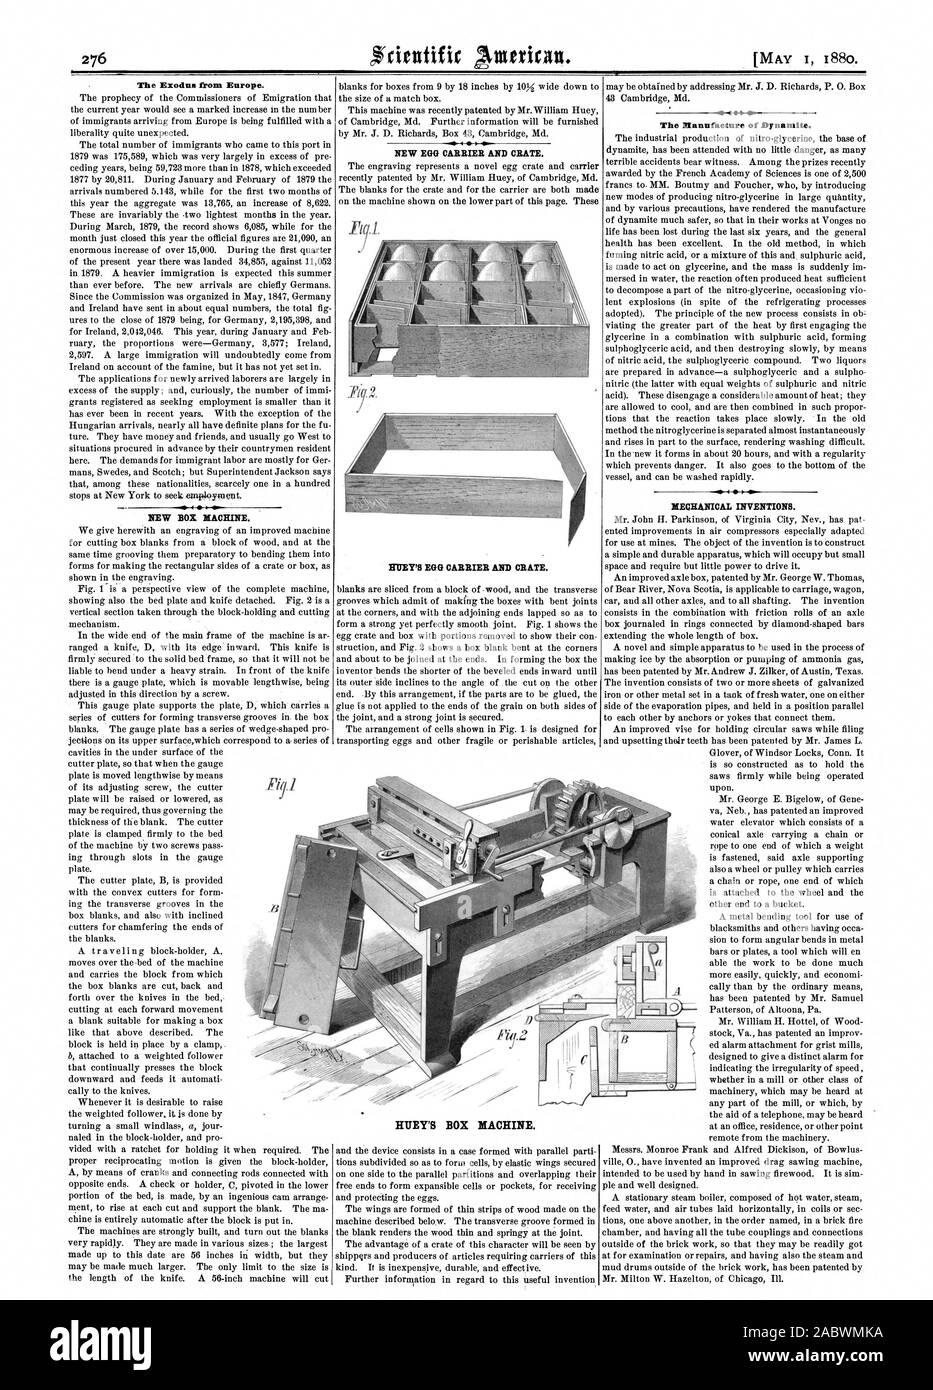 MAY I 1880. The Exodus from Europe. I 0 The Manufacture of Dynamite. MECHANICAL INVENTIONS. HURT'S EGG CARRIER AND CRATE. H1TEY'S BOX MACHINE., scientific american, 1880-05-01 Stock Photo